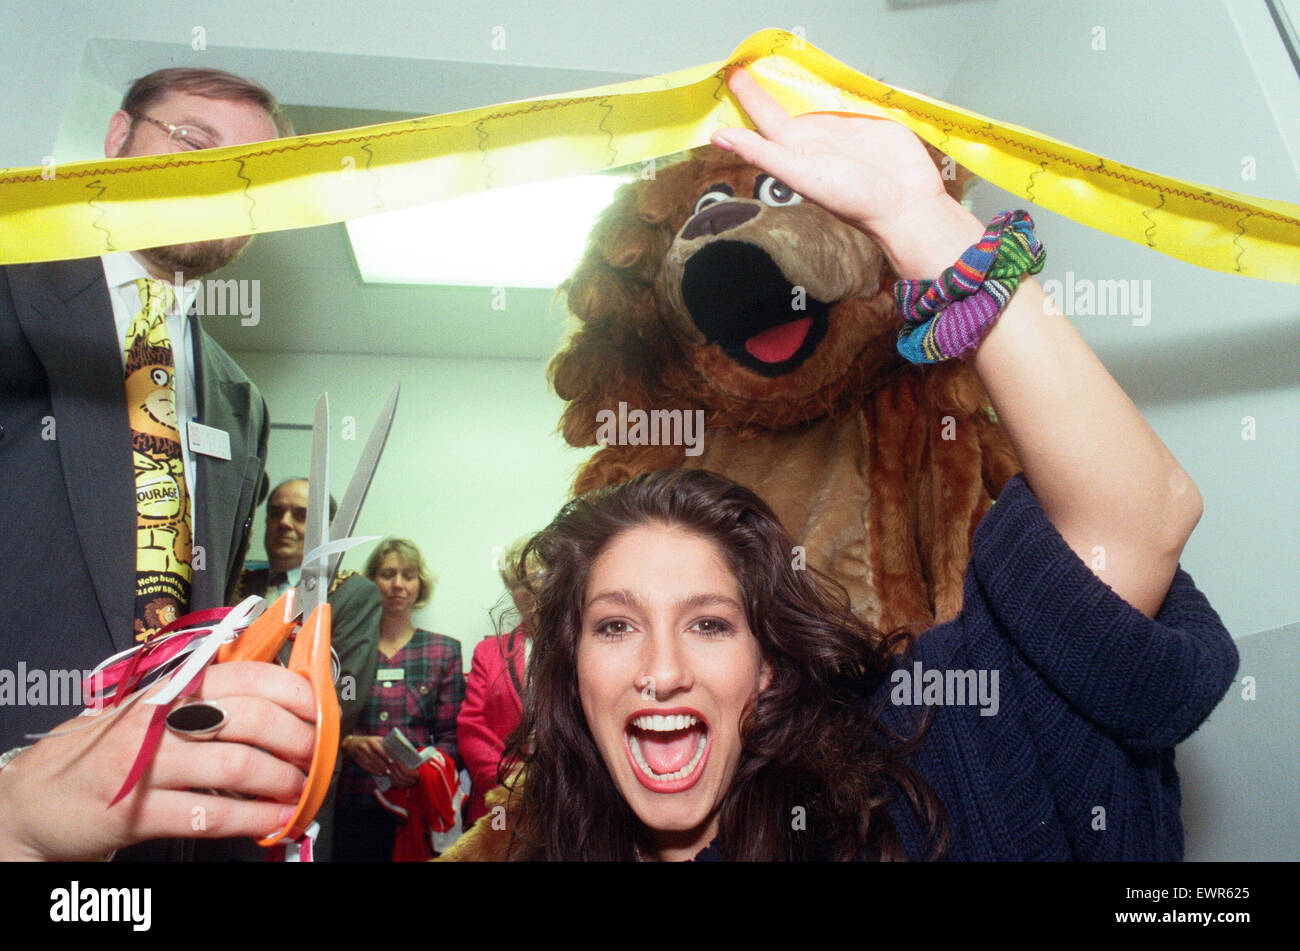 The Loco Lion appeal was launched at North Tees Hospital by Gladiator Diane Youdale (Jet). Diane cuts the ribbon to open the new kids ward. 8th September 1995. Stock Photo